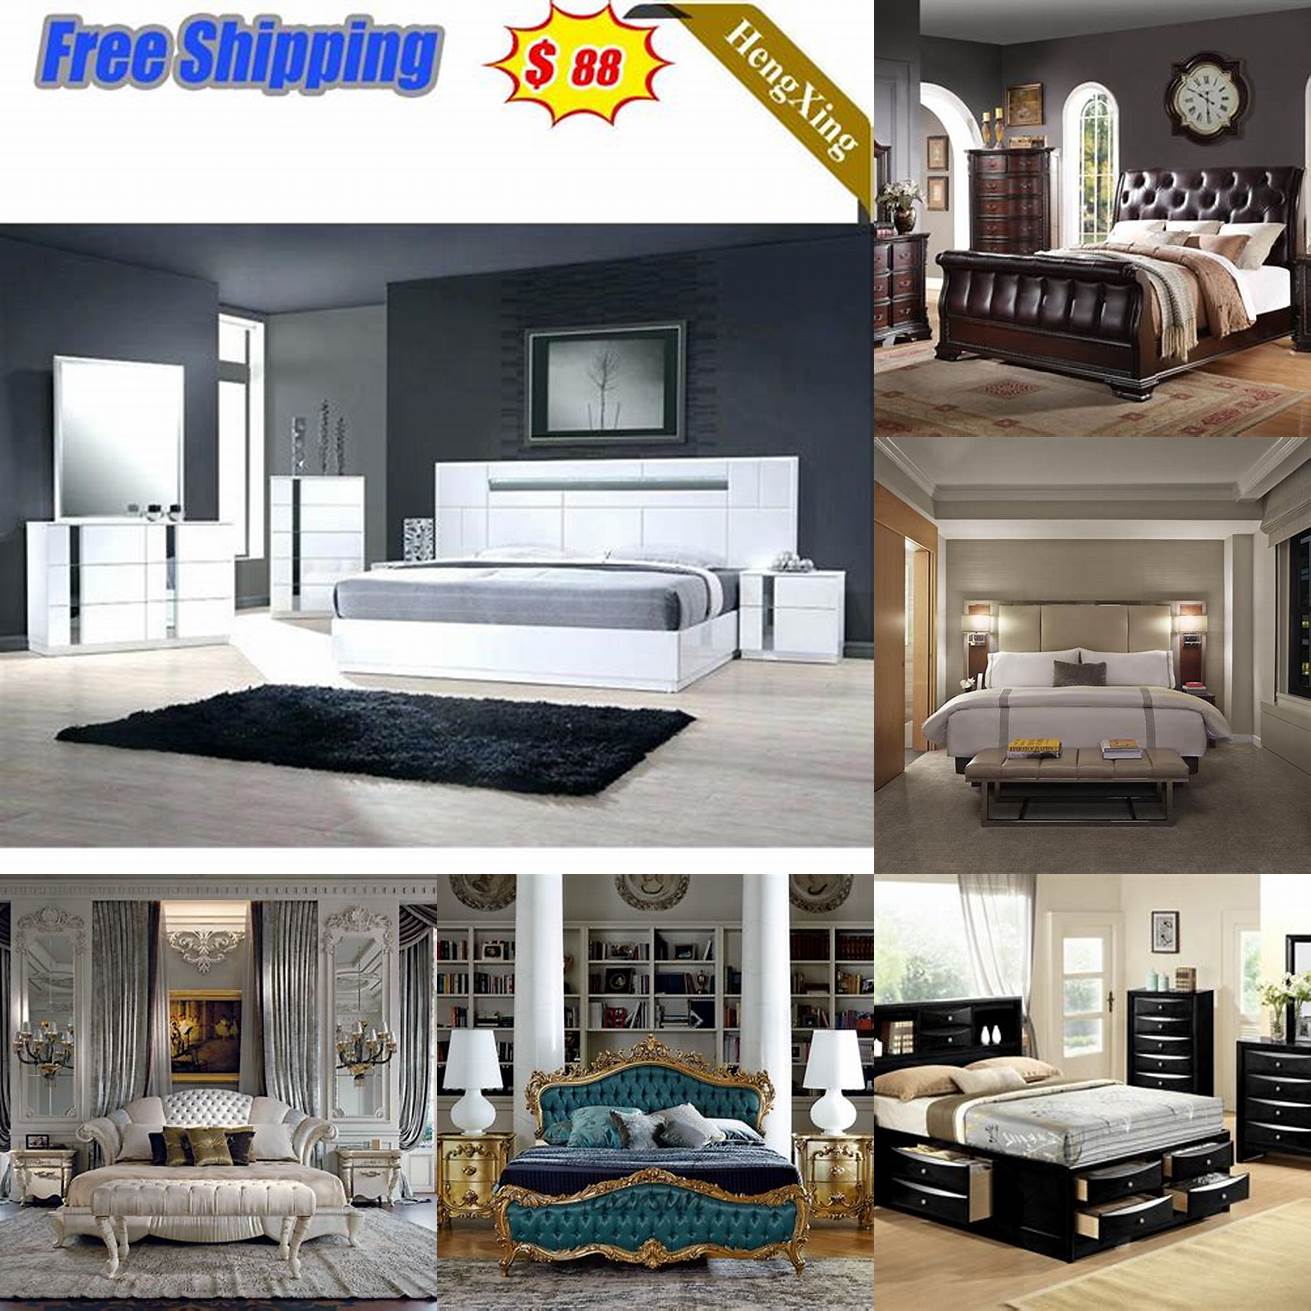 Customization As mentioned earlier many luxury furniture brands offer customization options for their bedroom sets This allows you to create a one-of-a-kind set that reflects your personal style and taste